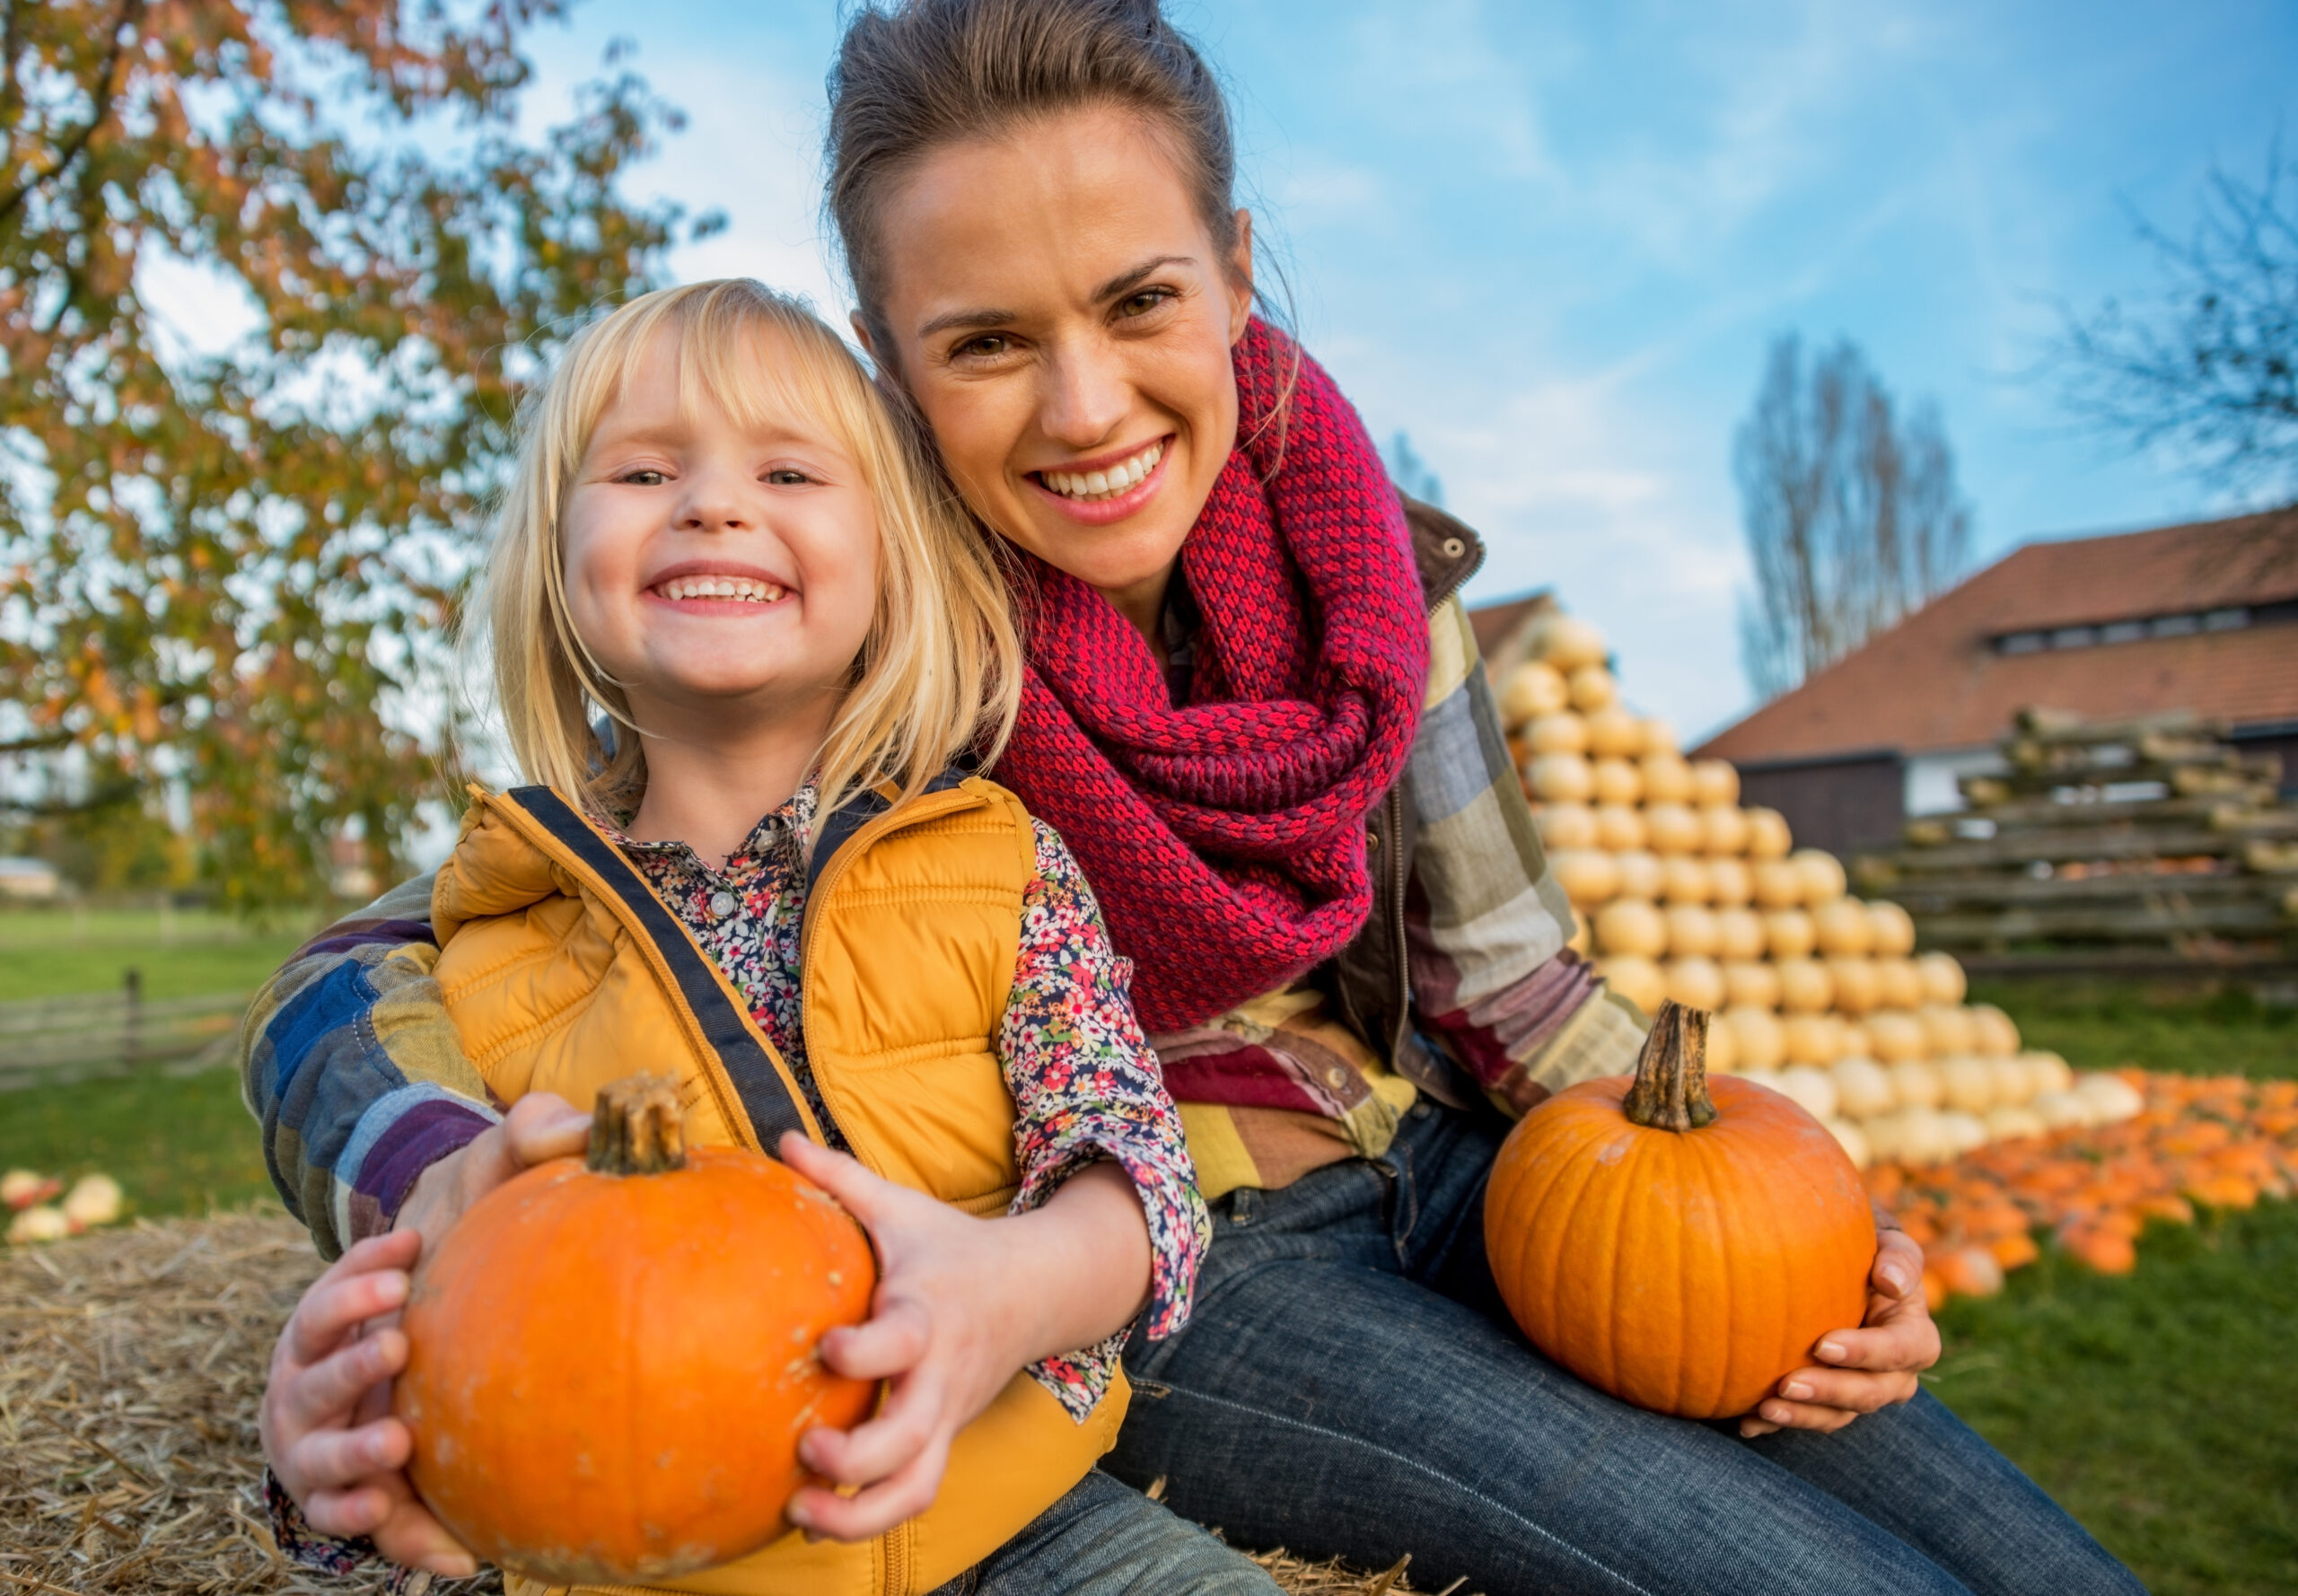 mom and daughter holding pumpkins in fall